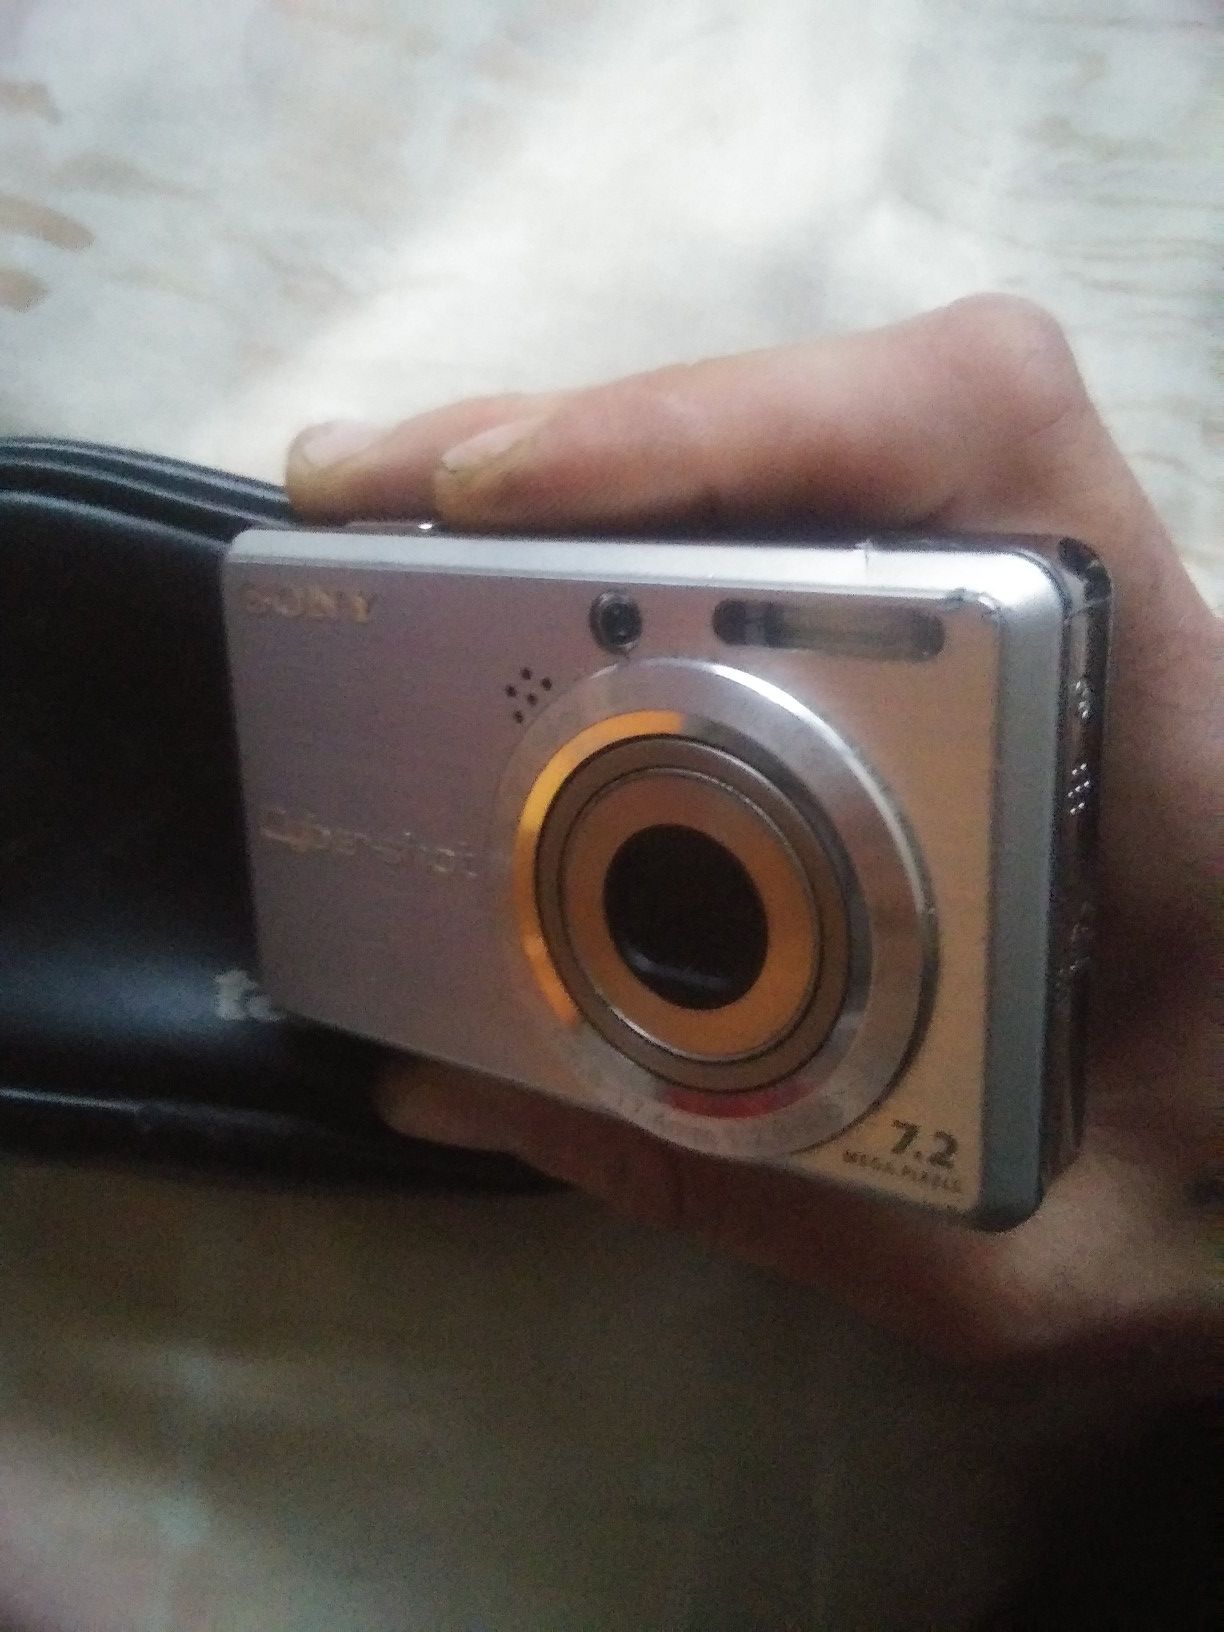 Sony digital camera with case and charger